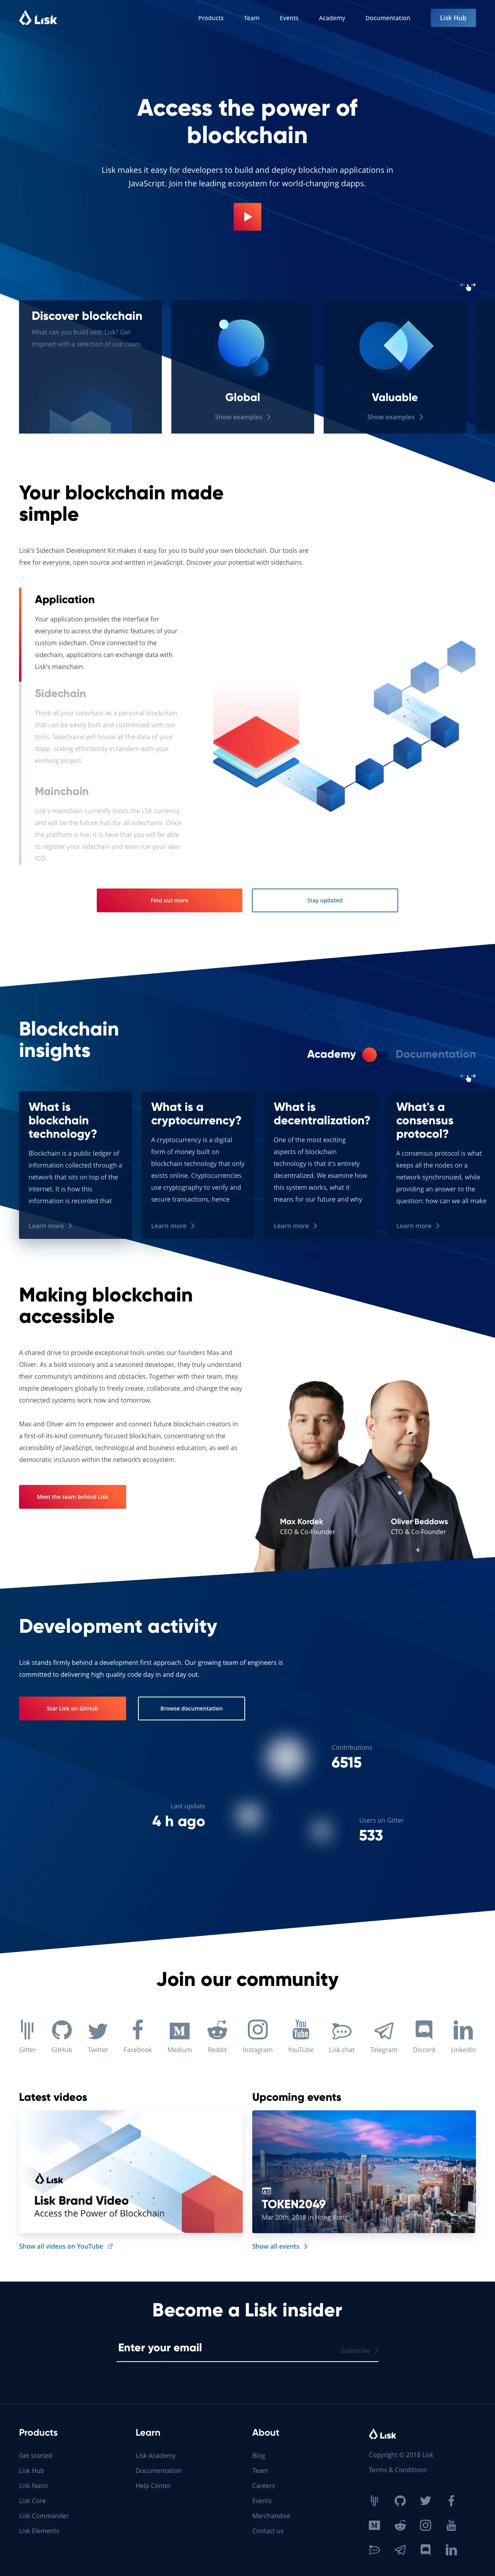 Lisk Landing Page Example: Lisk makes it easy for developers to build and deploy blockchain applications in JavaScript. Join the leading ecosystem for world-changing dapps.